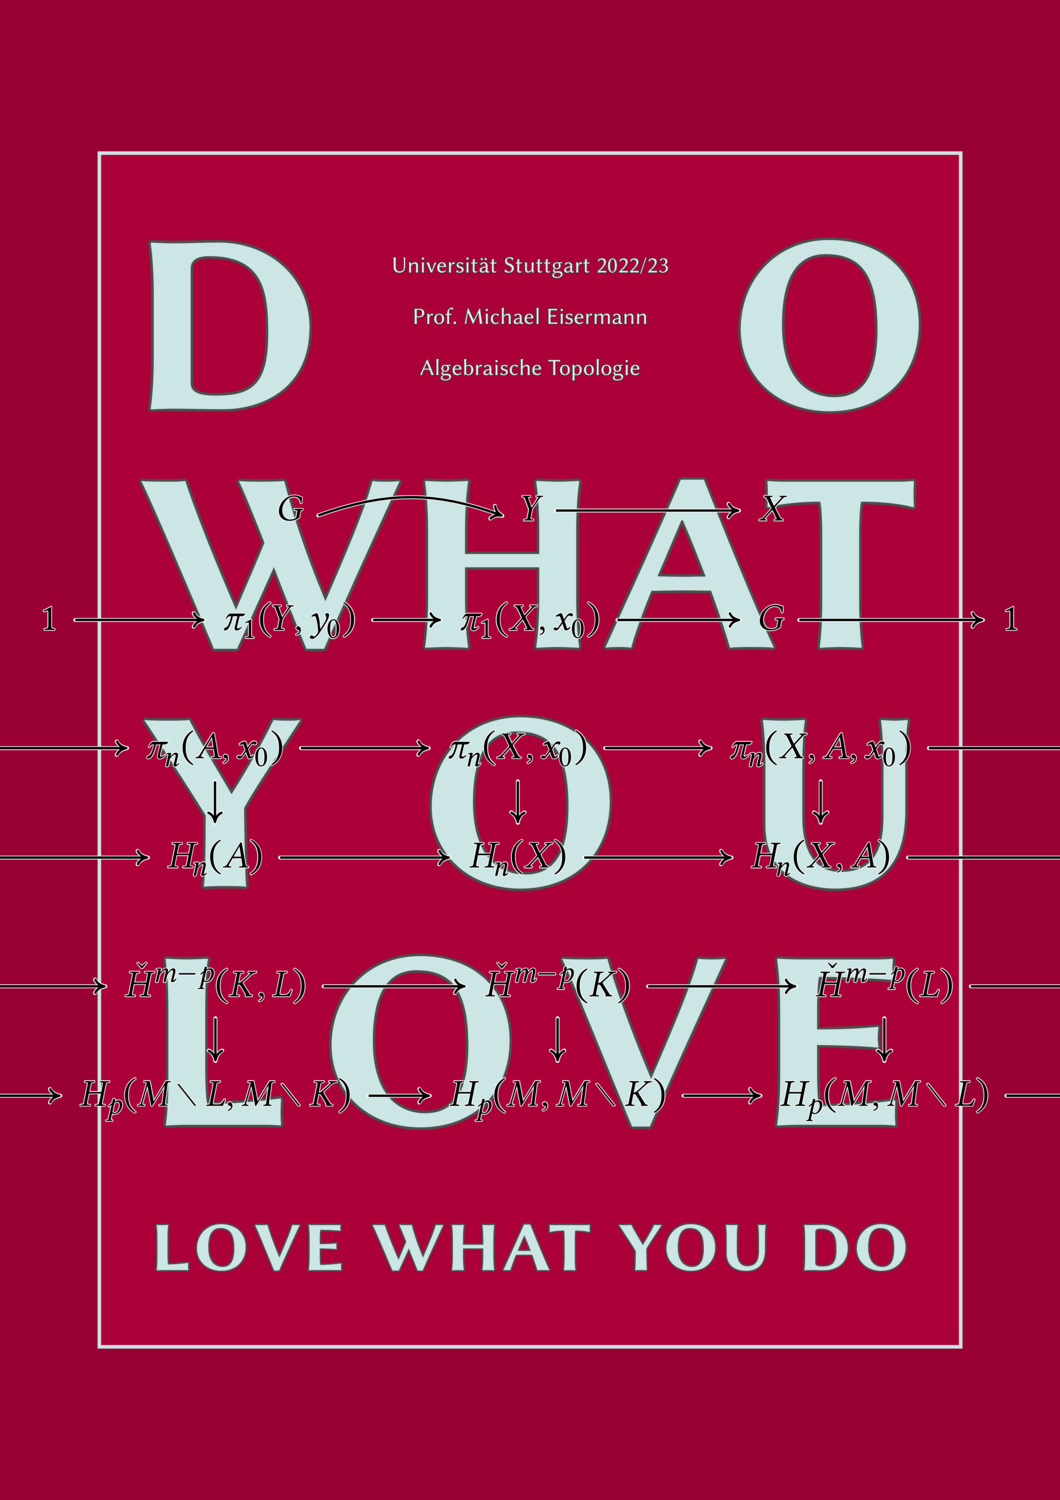 Do what you love. Love what you do.